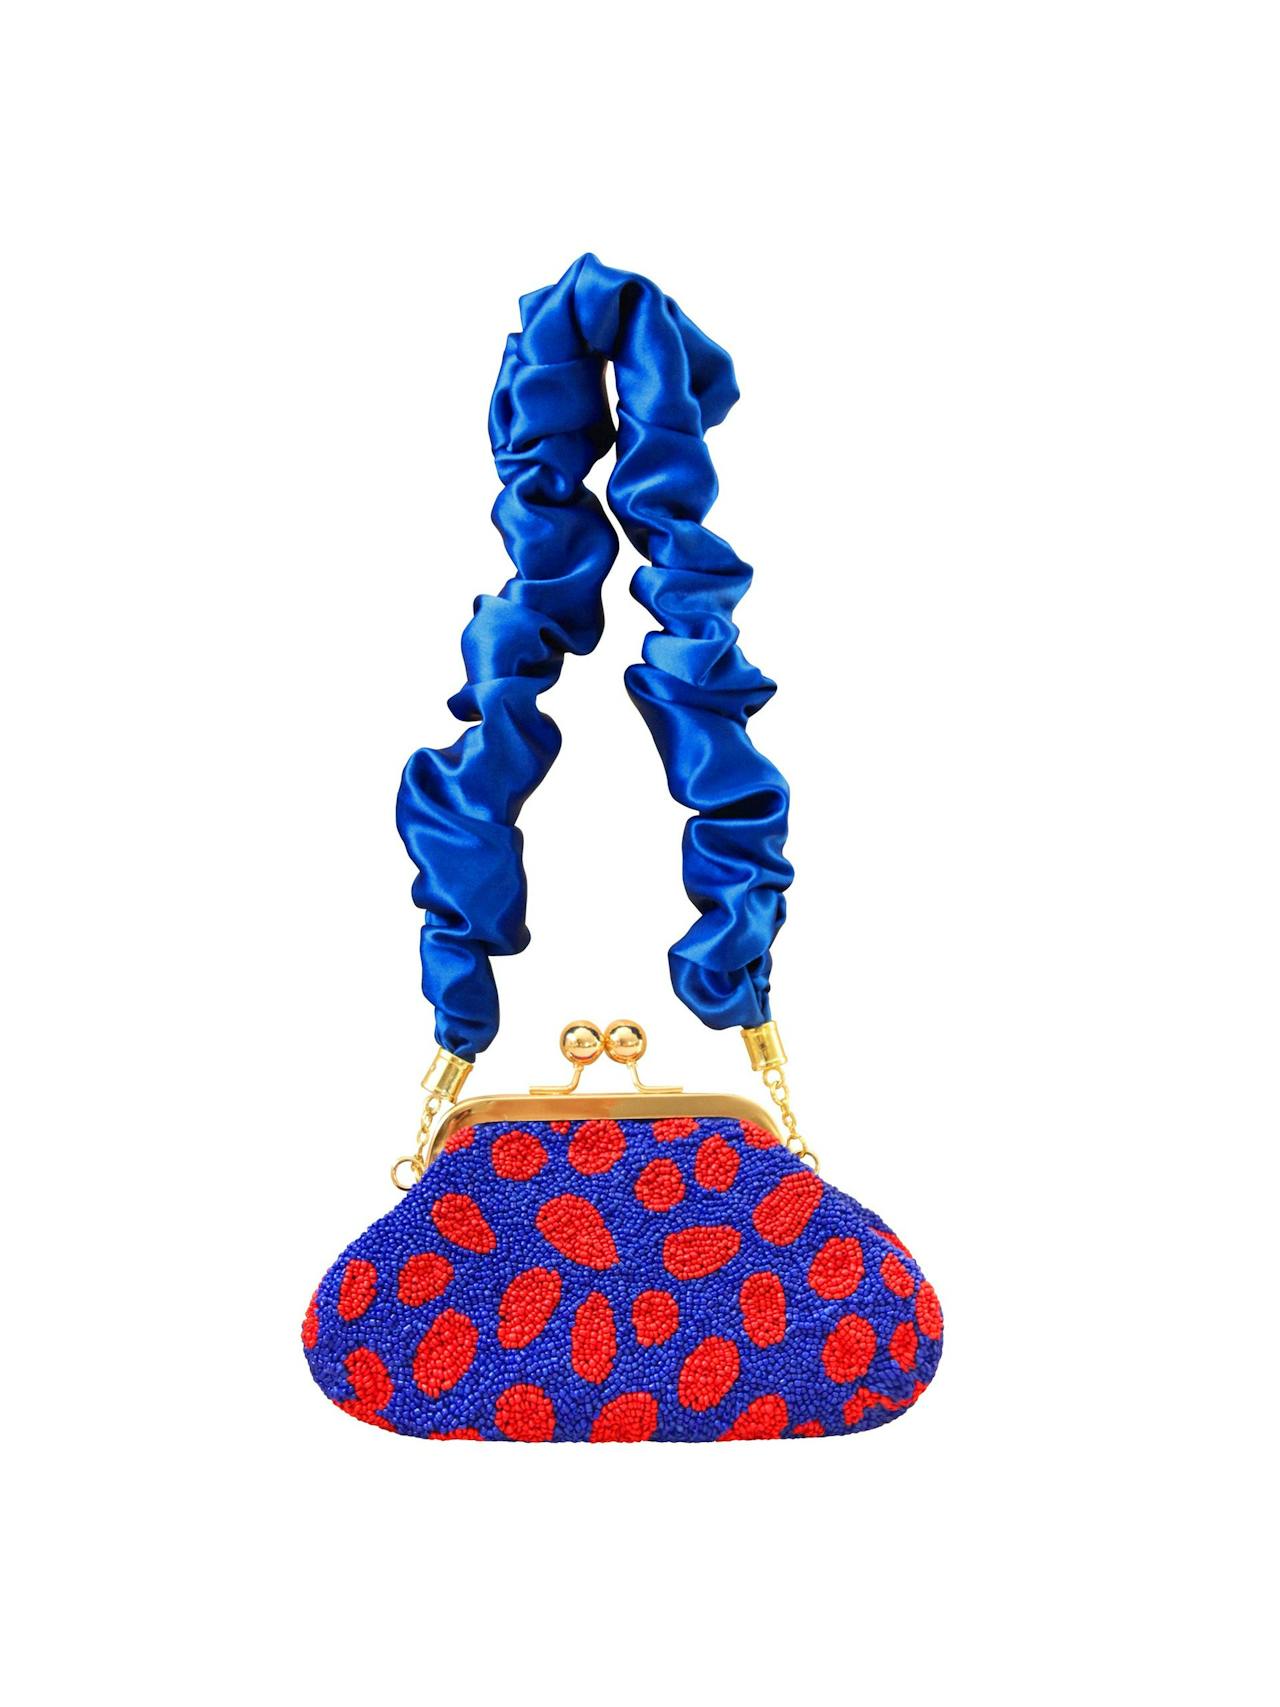 Arnoldi mandy hand-beaded clutch in savoy blue and red